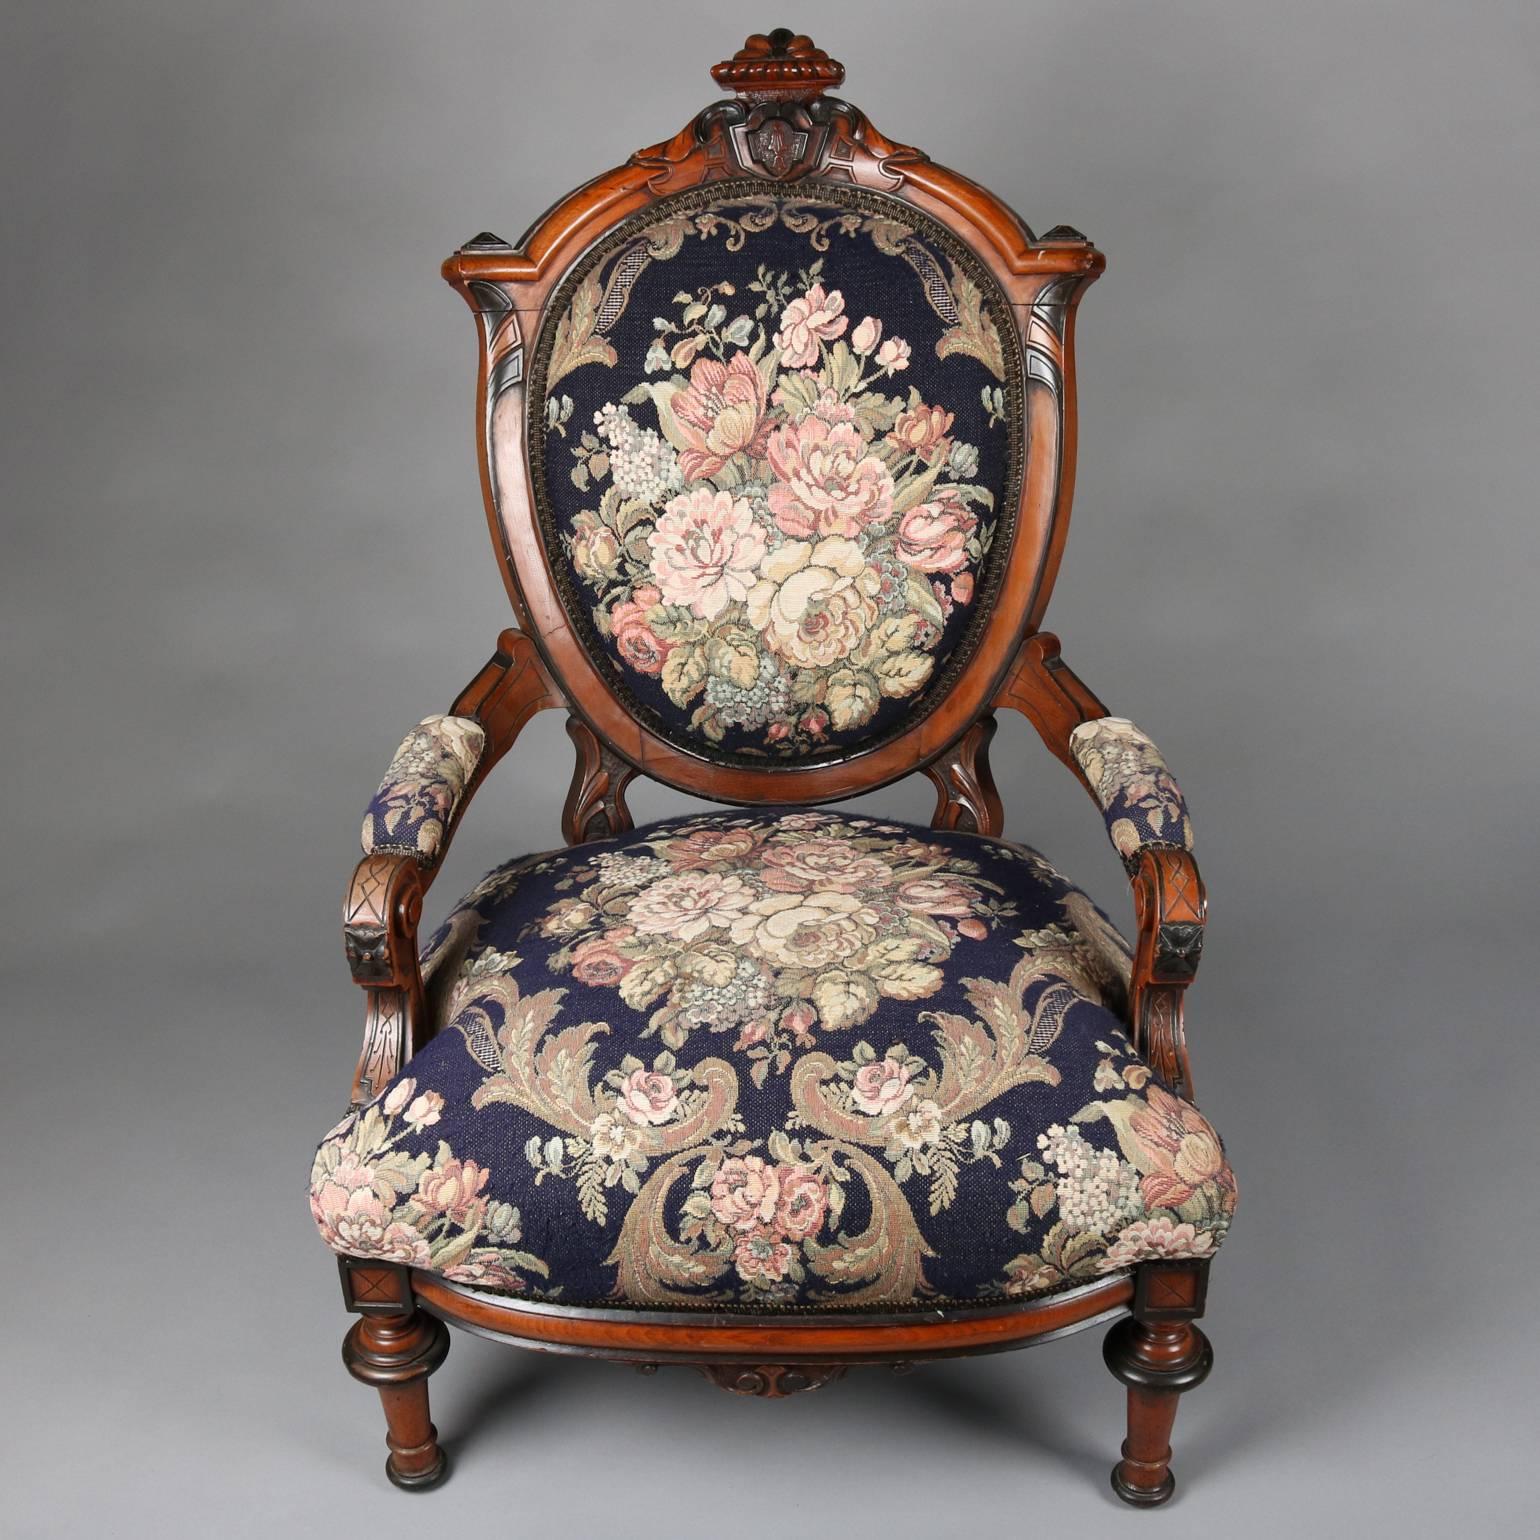 Antique Renaissance Revival Parlor set features carved scrolled and foliate mahogany frame with ebonized accents with floral upholstery and includes settee and armchair, circa 1860

Measures: 47" H x 67" W x 23" D, settee; 40" H